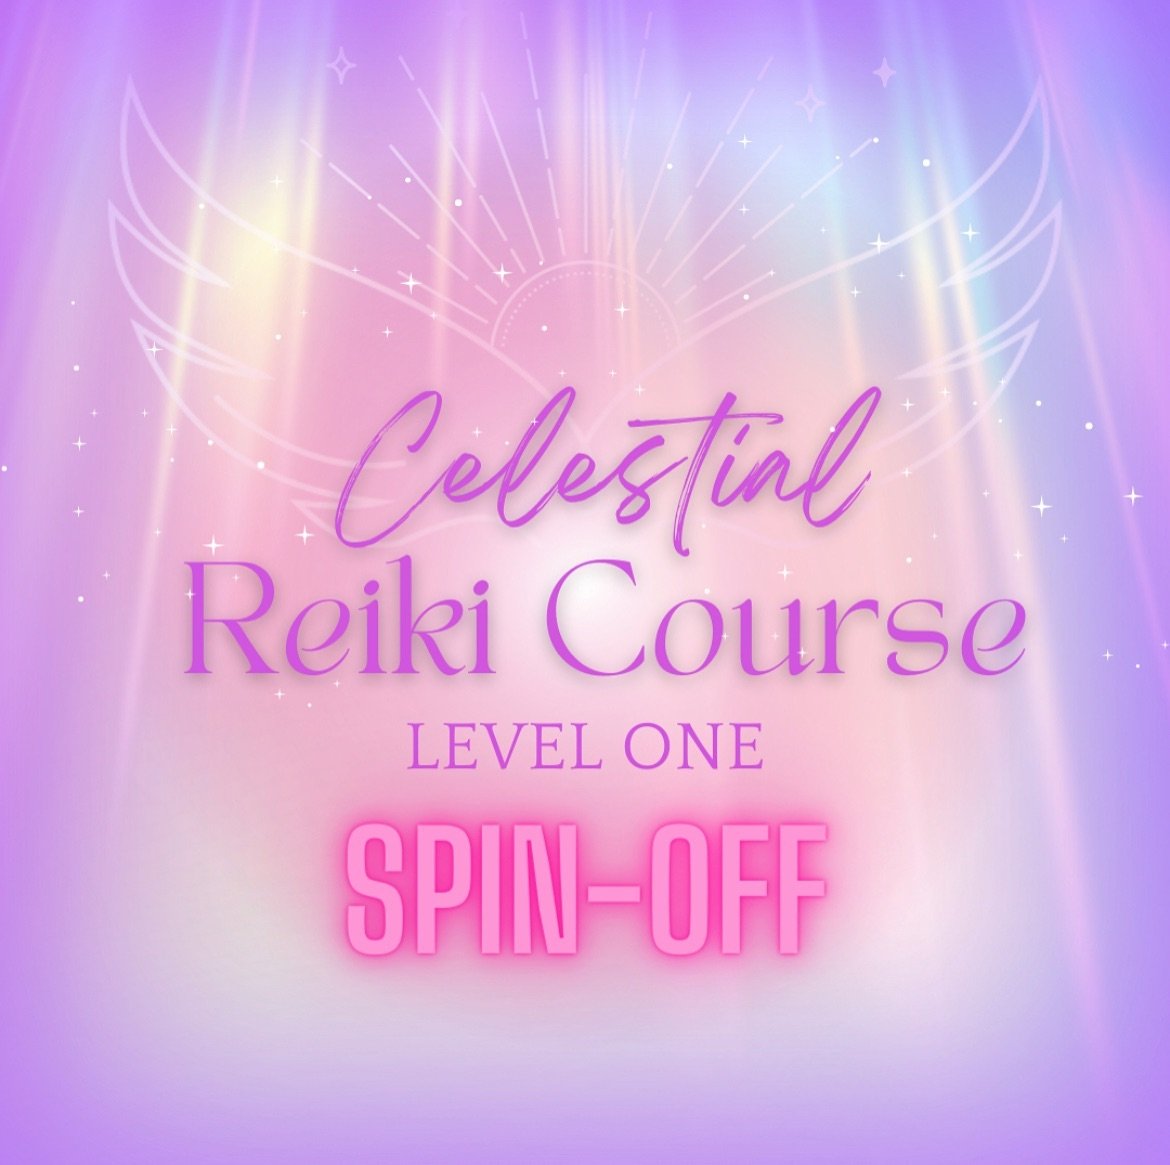 Happy Friday everyone!!! I am SO excited to be teaching my level one reiki training this weekend!! Due to high demand I am doing a SPIN OFF training course, which allows you to catch up in your own time via the class recordings. 

A separate LIVE gro